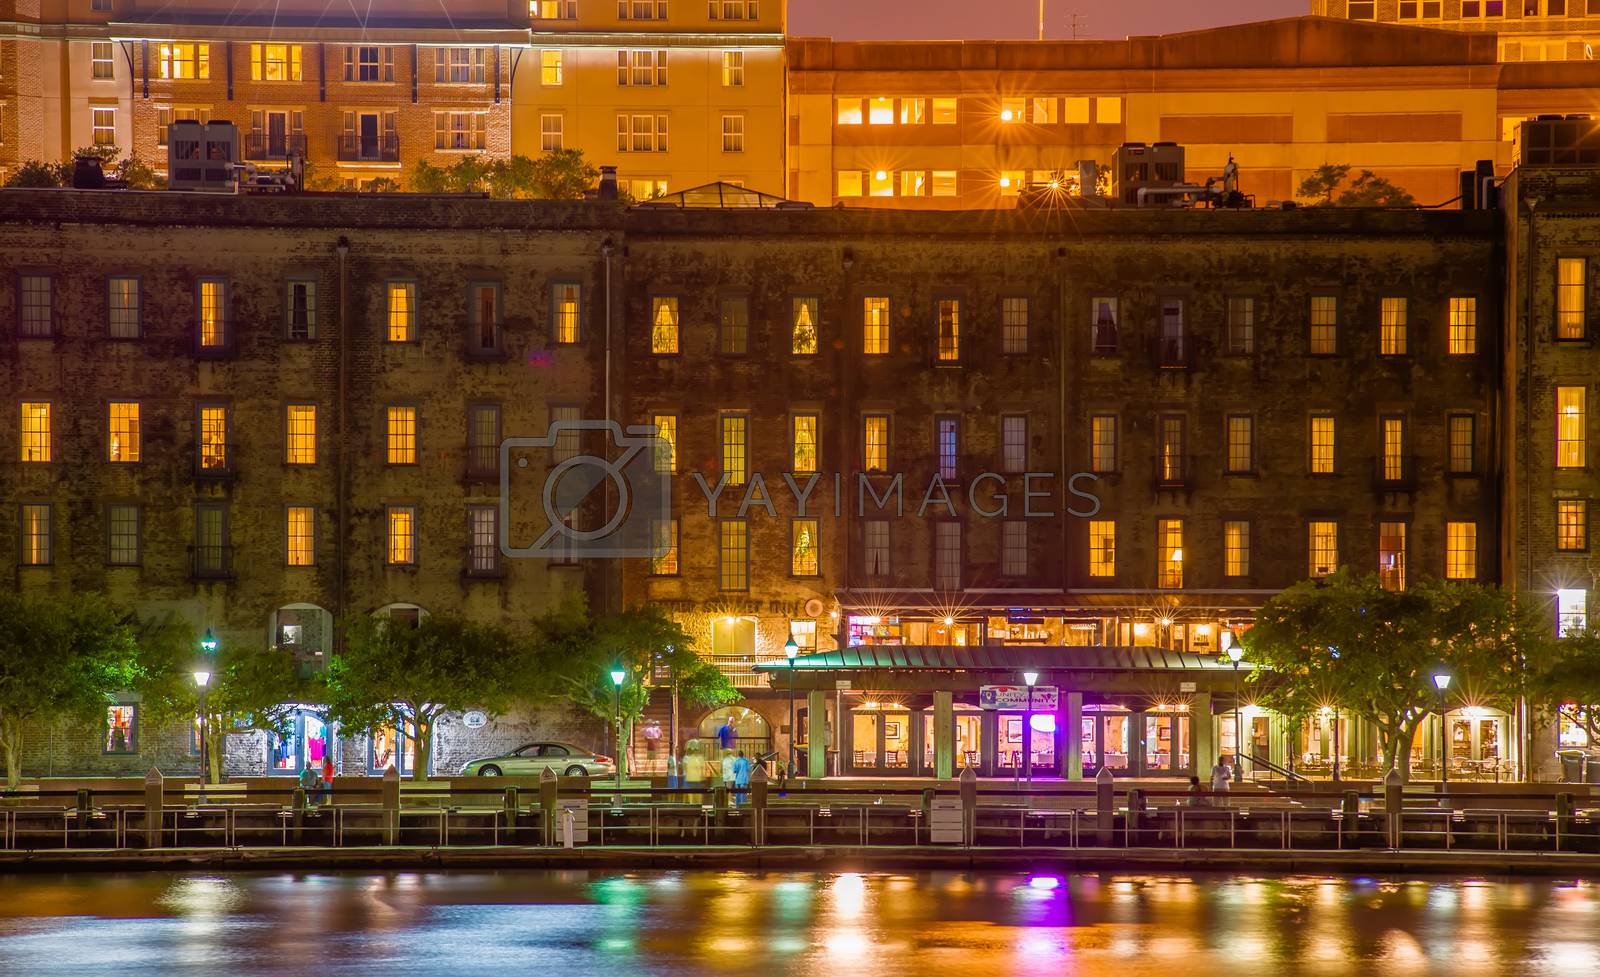 Royalty free image of River Street at Twilight in Savannah Georgia by digidreamgrafix